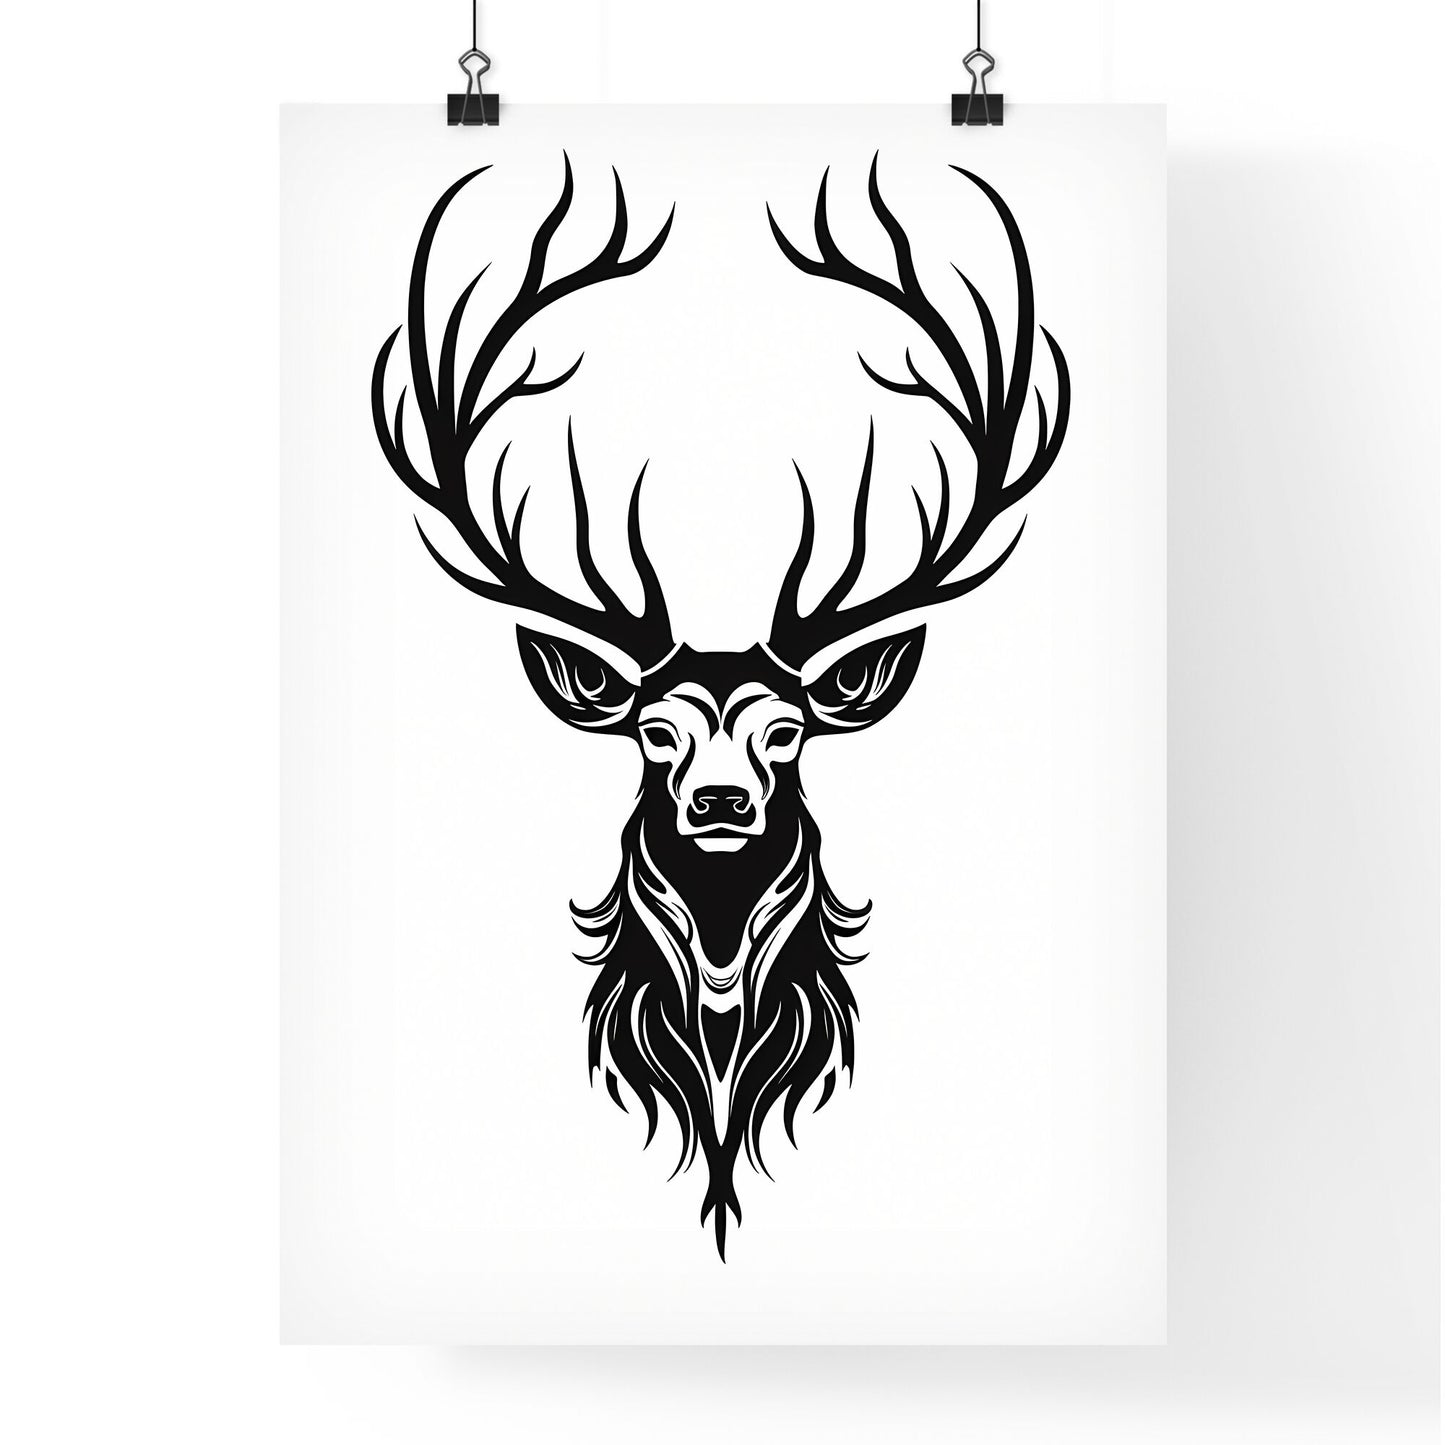 Black Silhouette Stag On White Background - A Black And White Image Of A Deer Head With Antlers Default Title